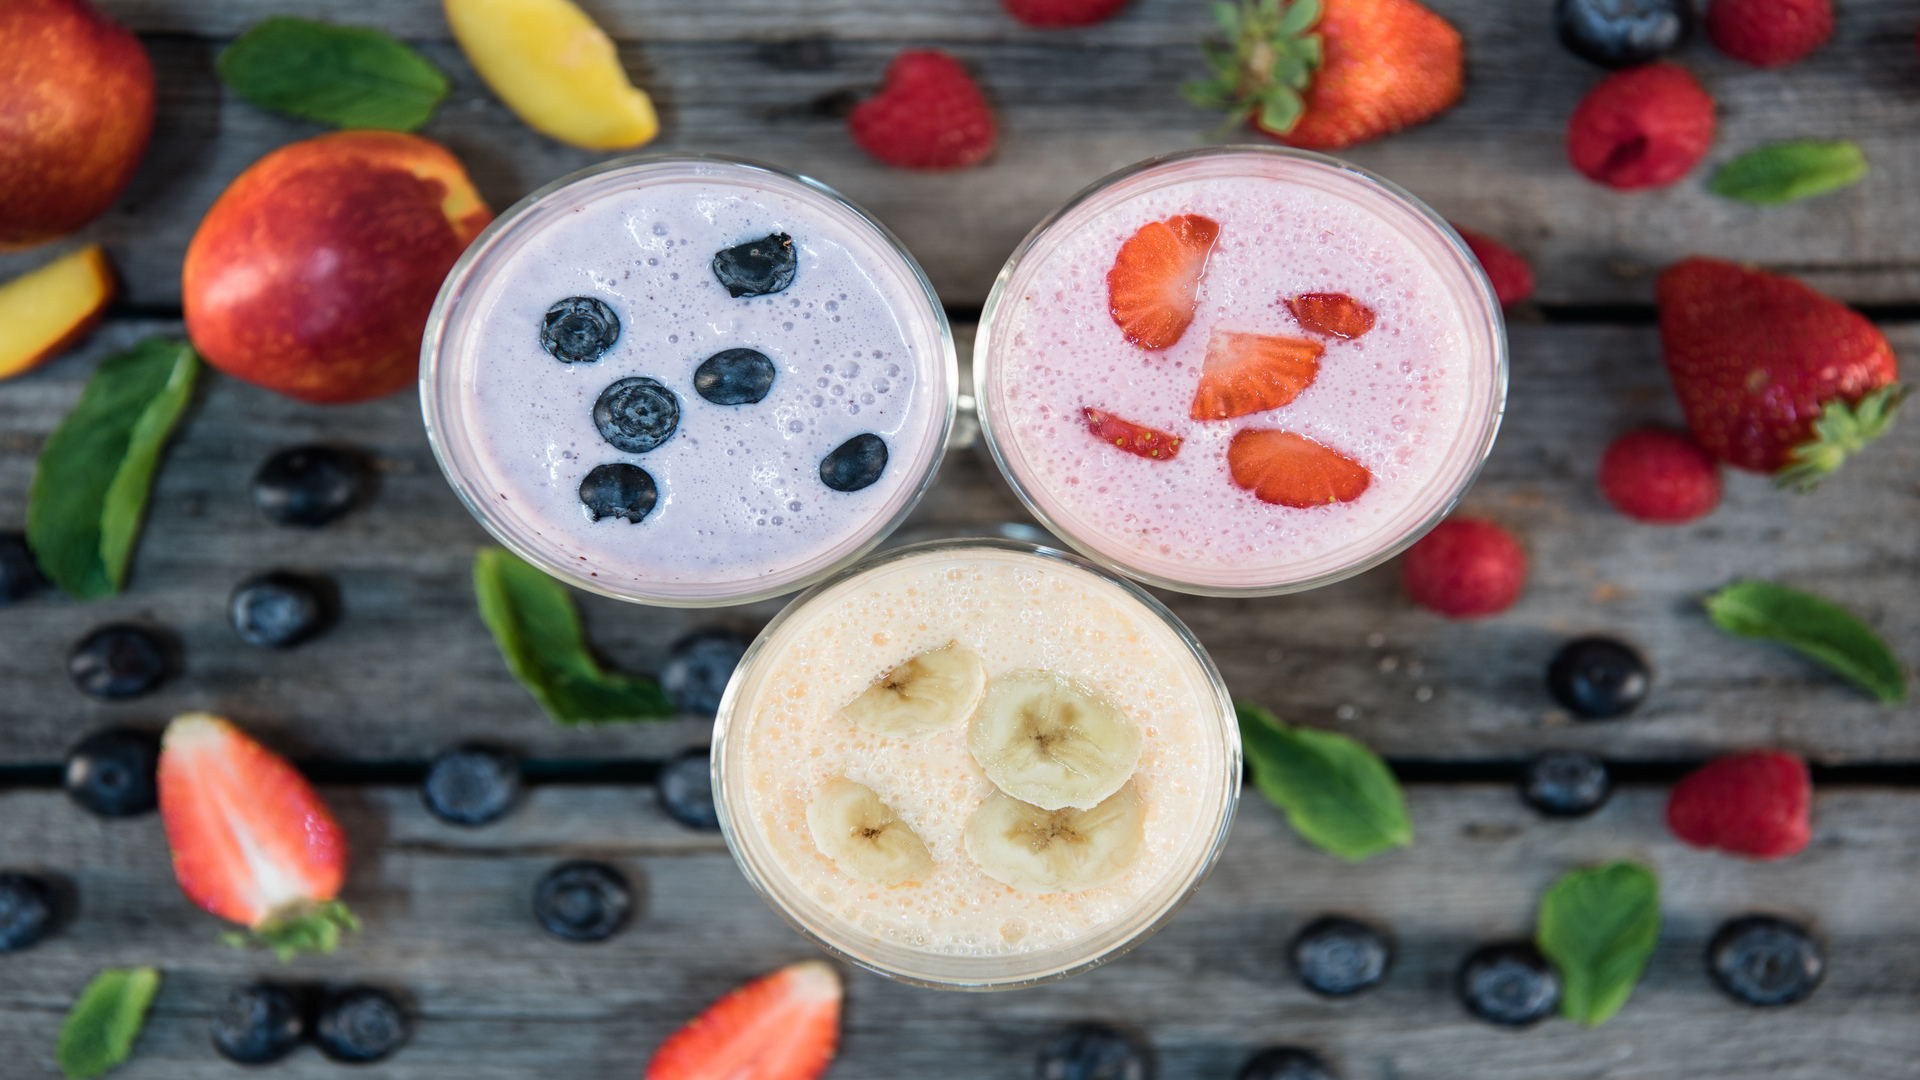 Best 5 Bedtime Smoothies for Weight Loss